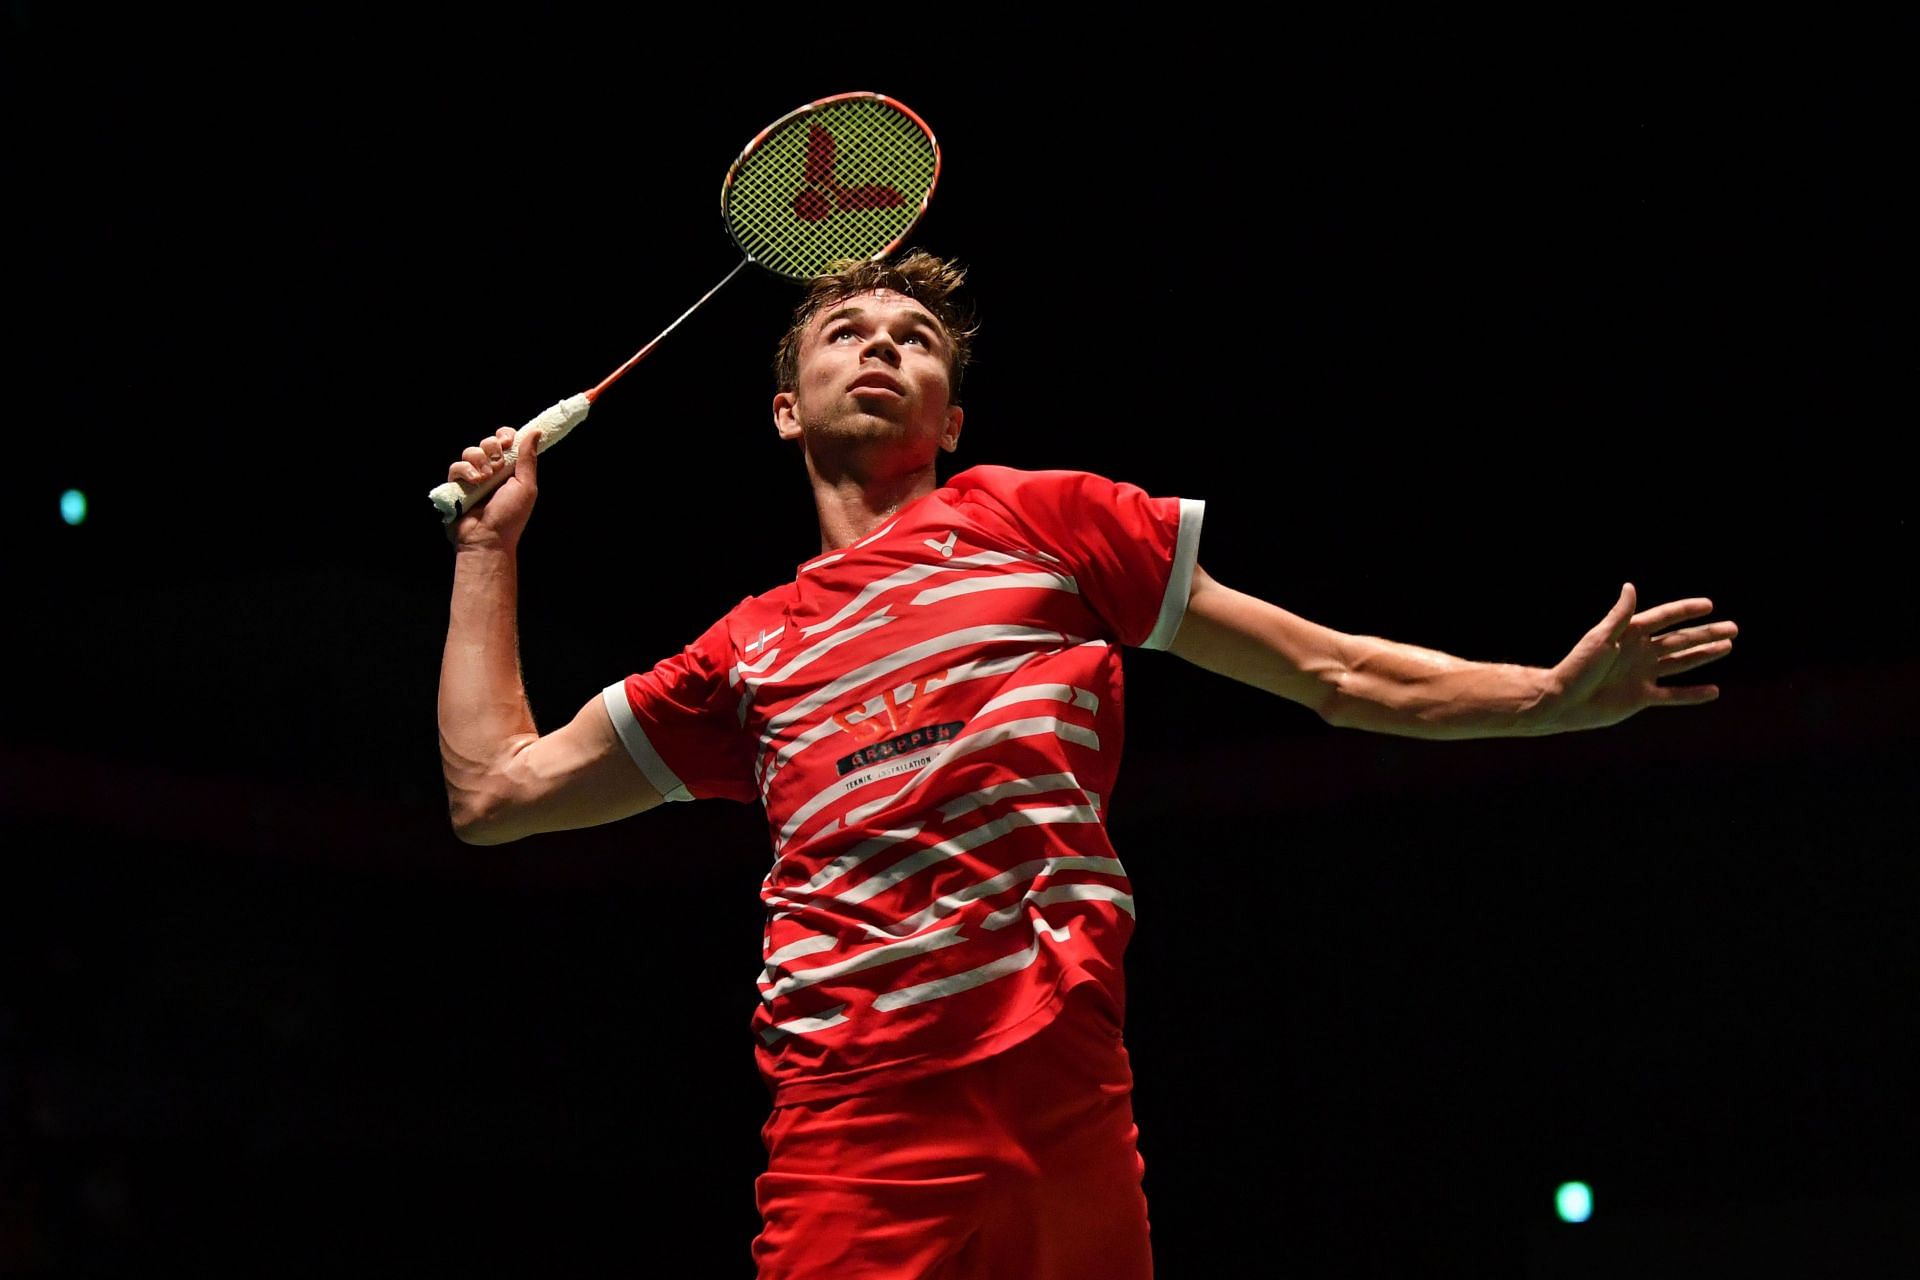 Rasmus Gemke aims for a smash at an earlier edition of the Yonex Japan Open (Image courtesy: Getty Images)